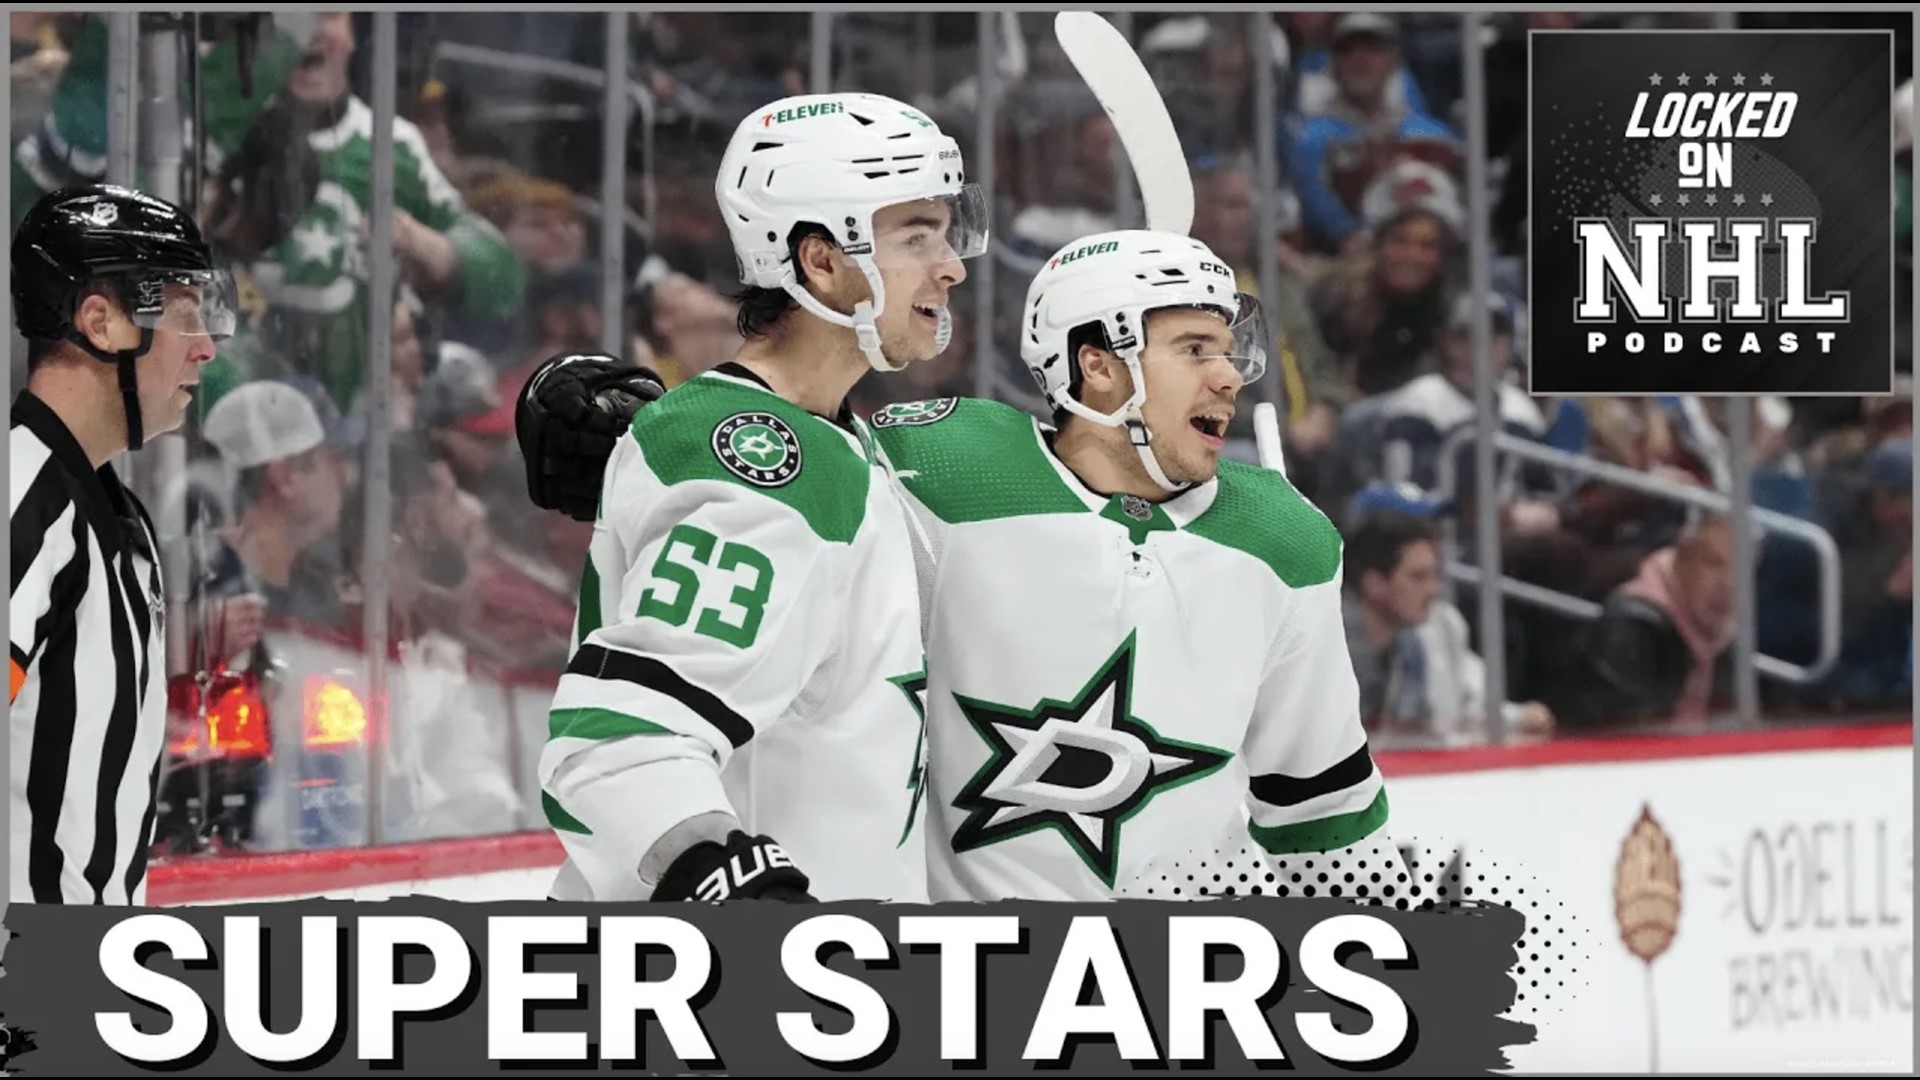 On today's Western Conference Tuesday edition of the Locked on NHL Podcast, Seth Toupal and Nick Morgan discuss whether or not the Dallas Stars are indeed a wagon